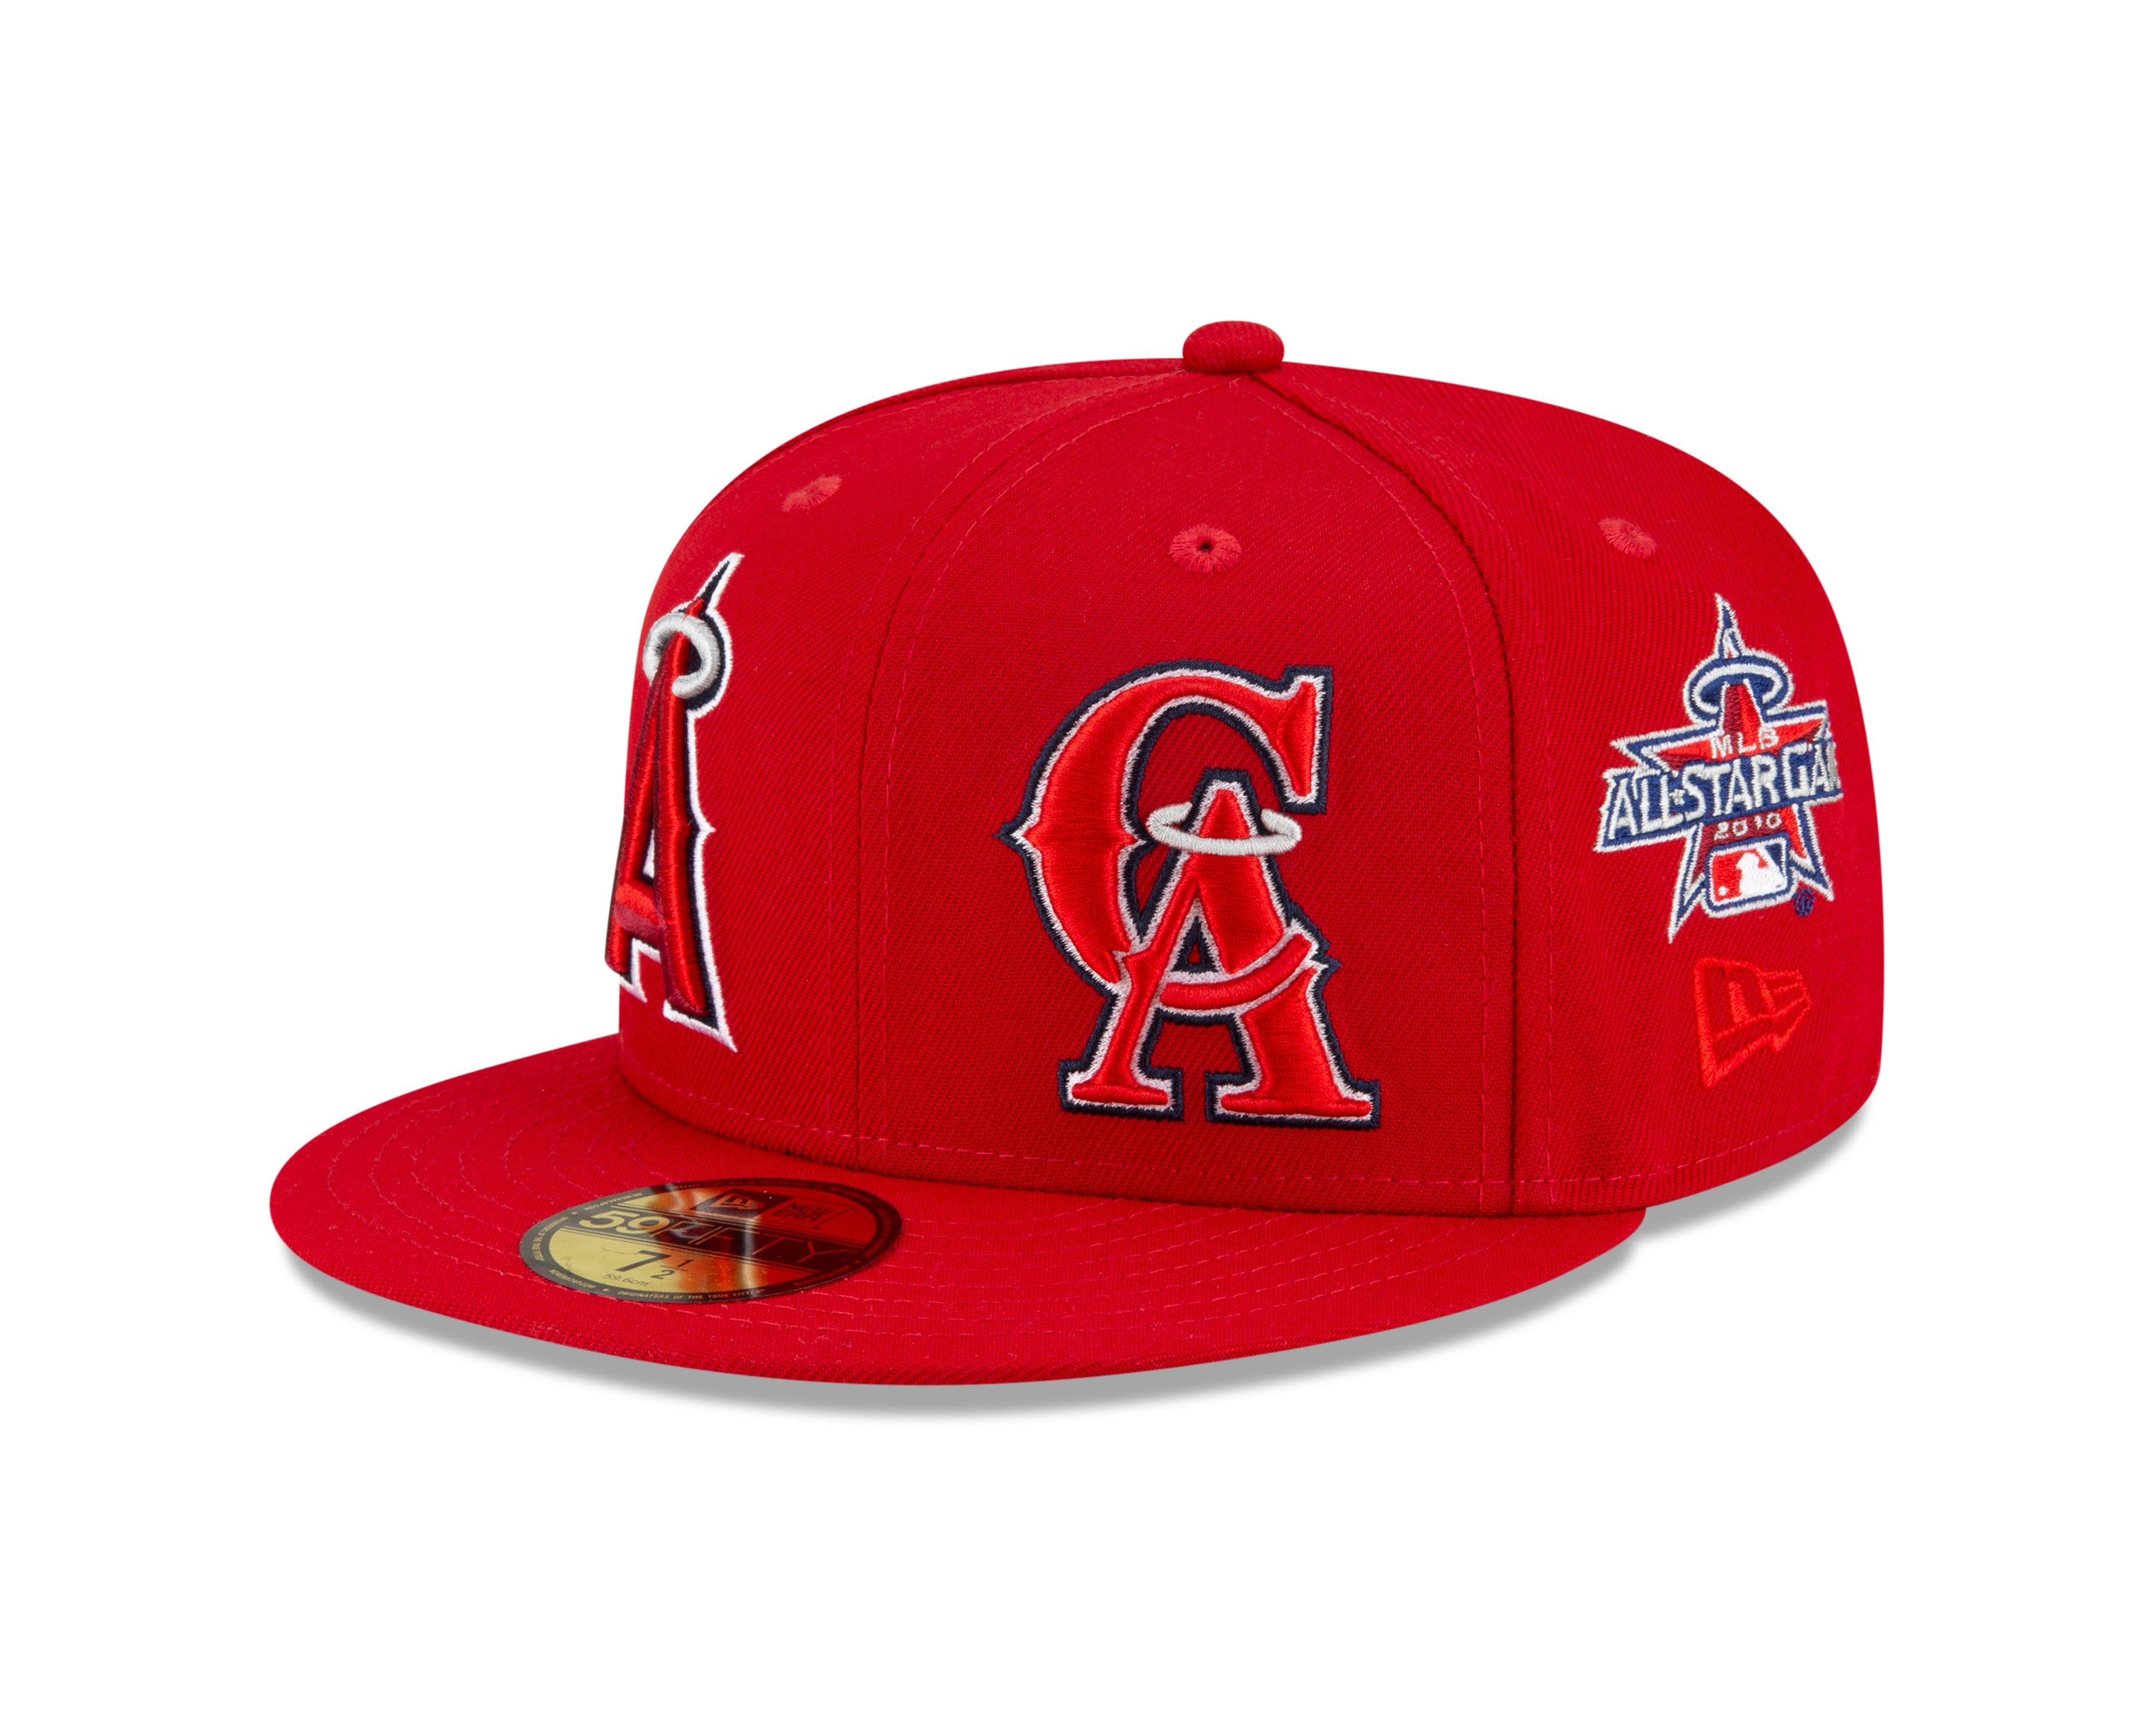 Anaheim La Angels Patch Angels Patch La Angels Patches Los Angels Patch 4'' Tall